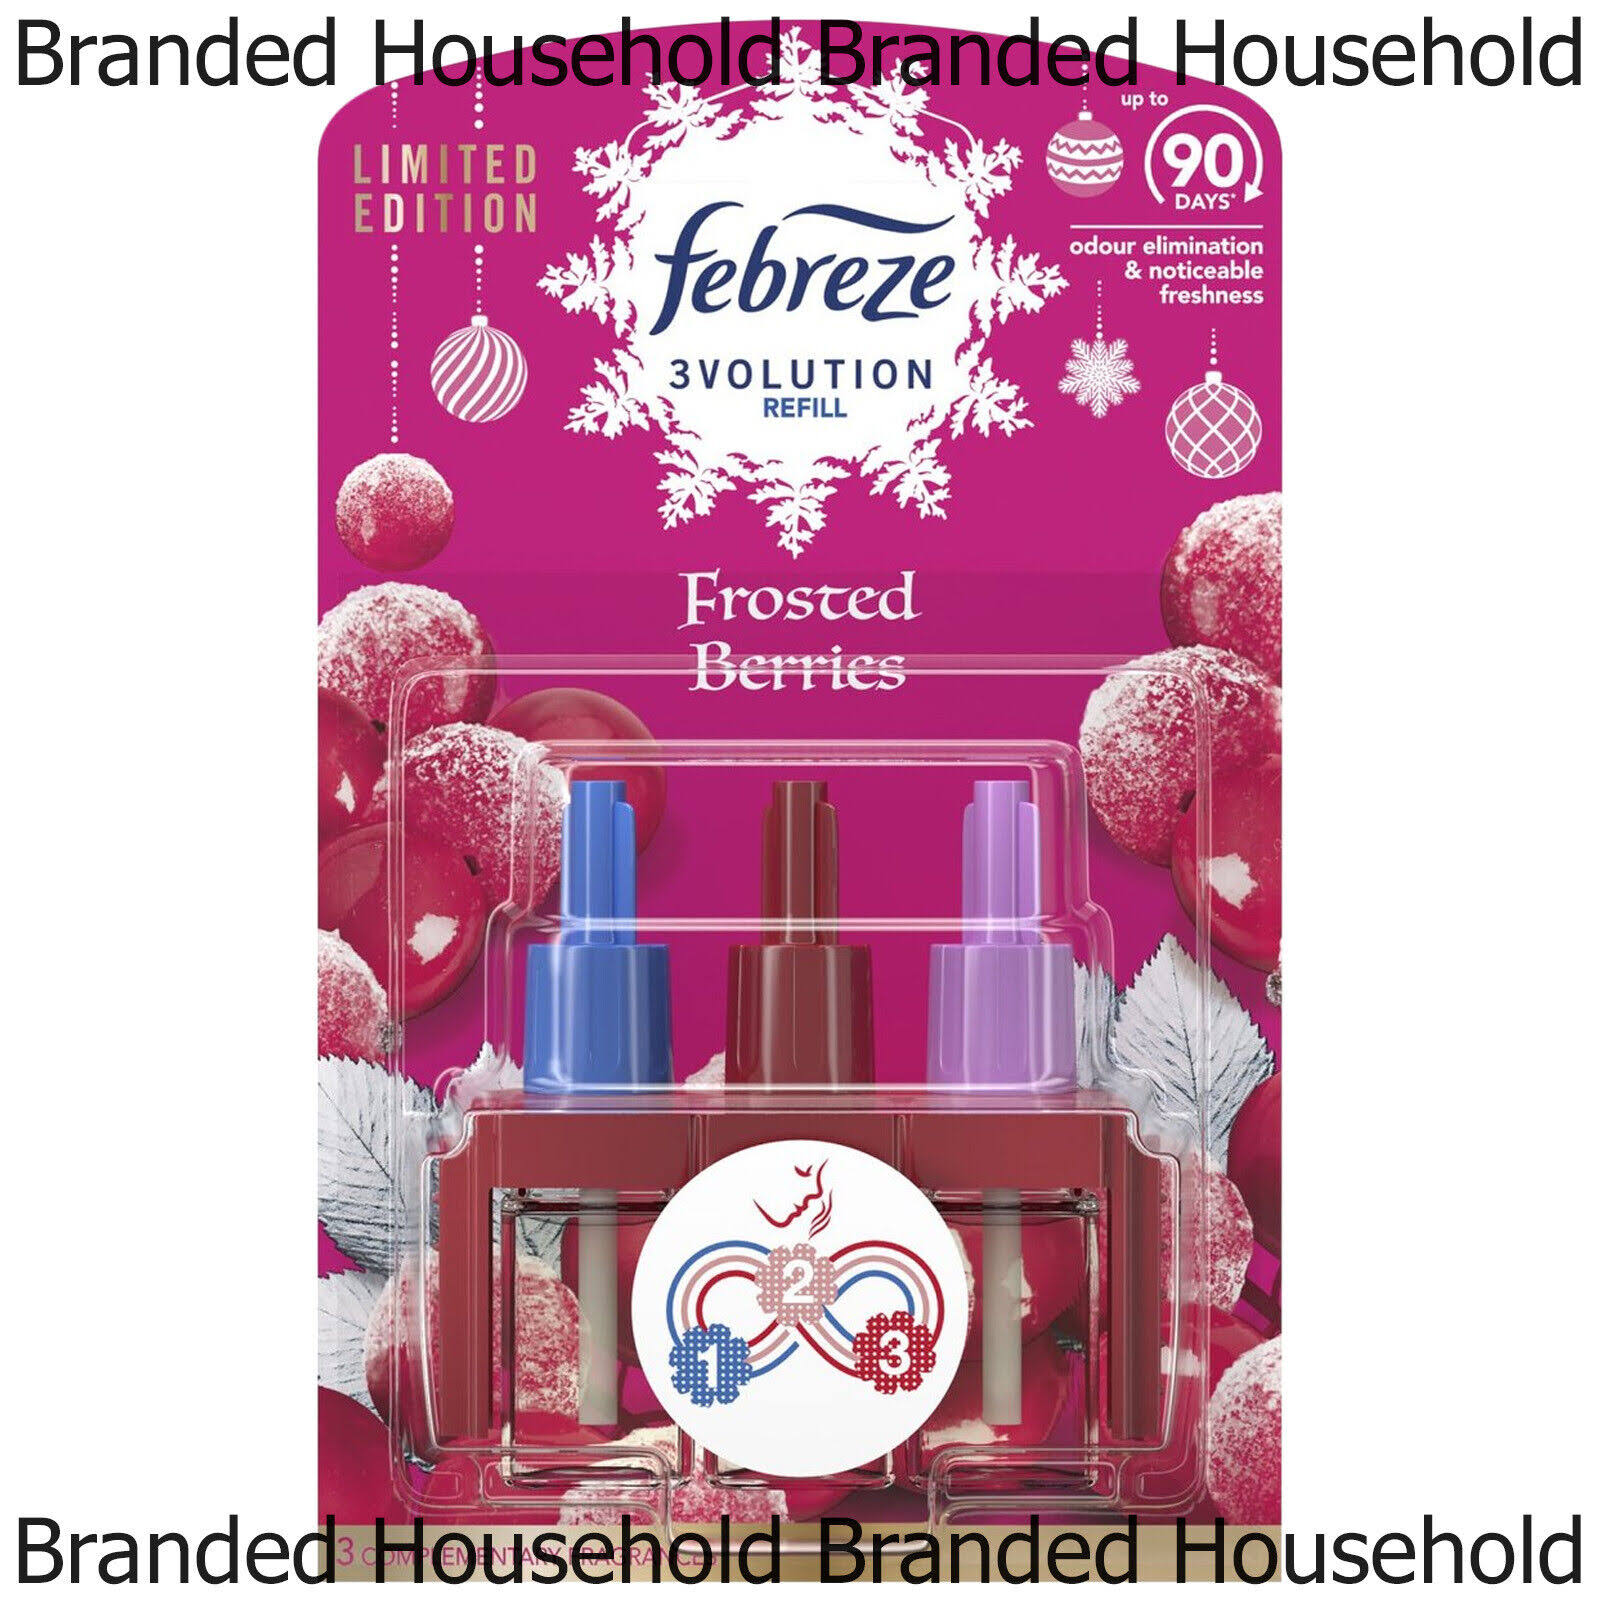 Febreze 3Volution Refill Frosted Berries